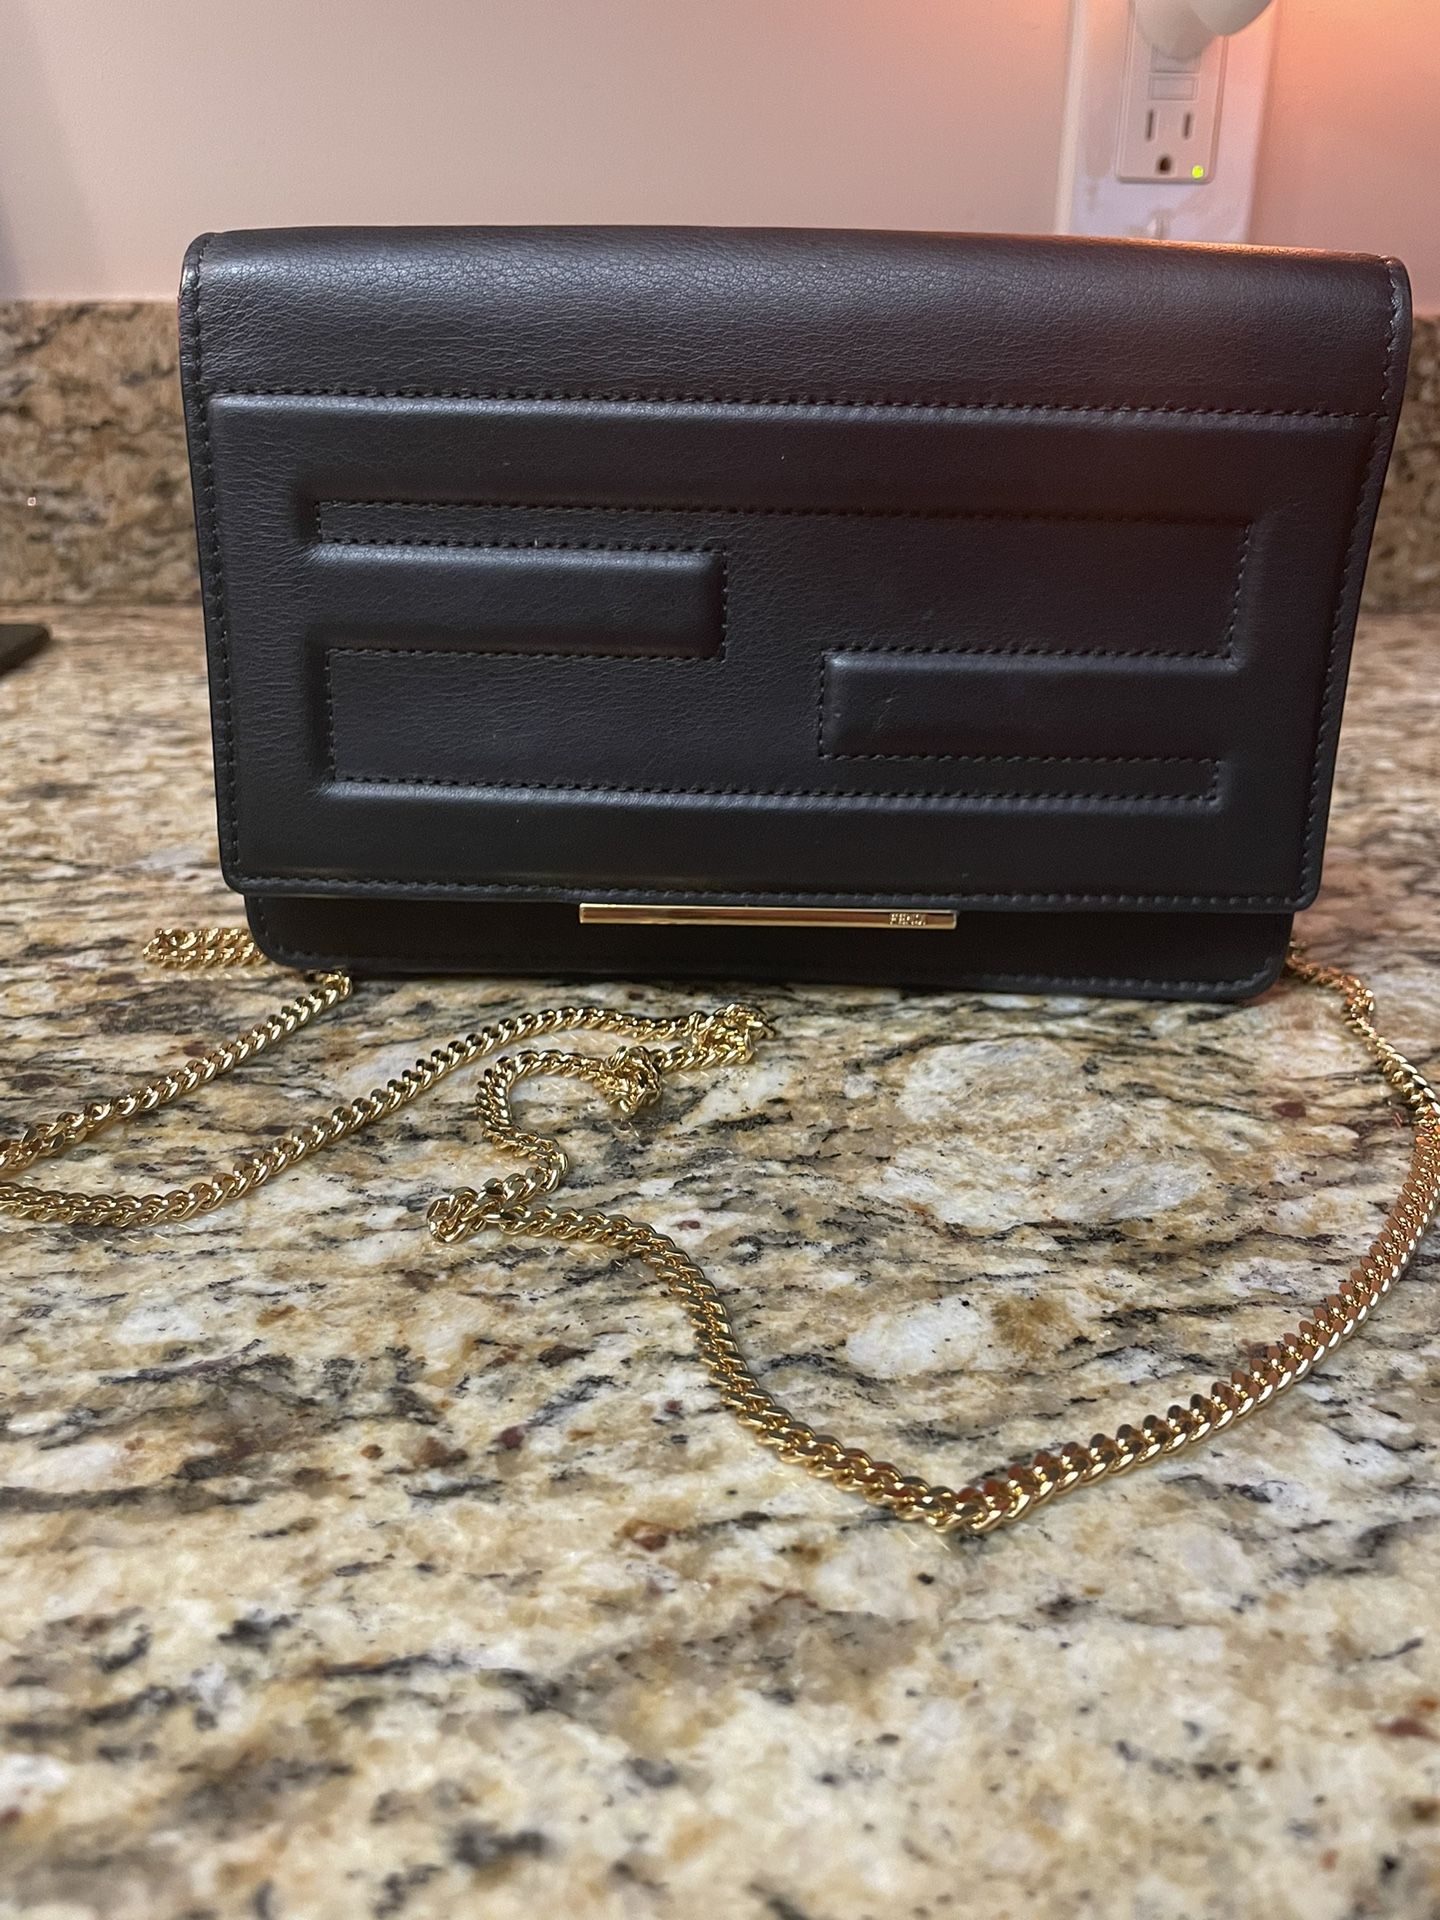 Fendi Black Leather Tube Wallet With Chain